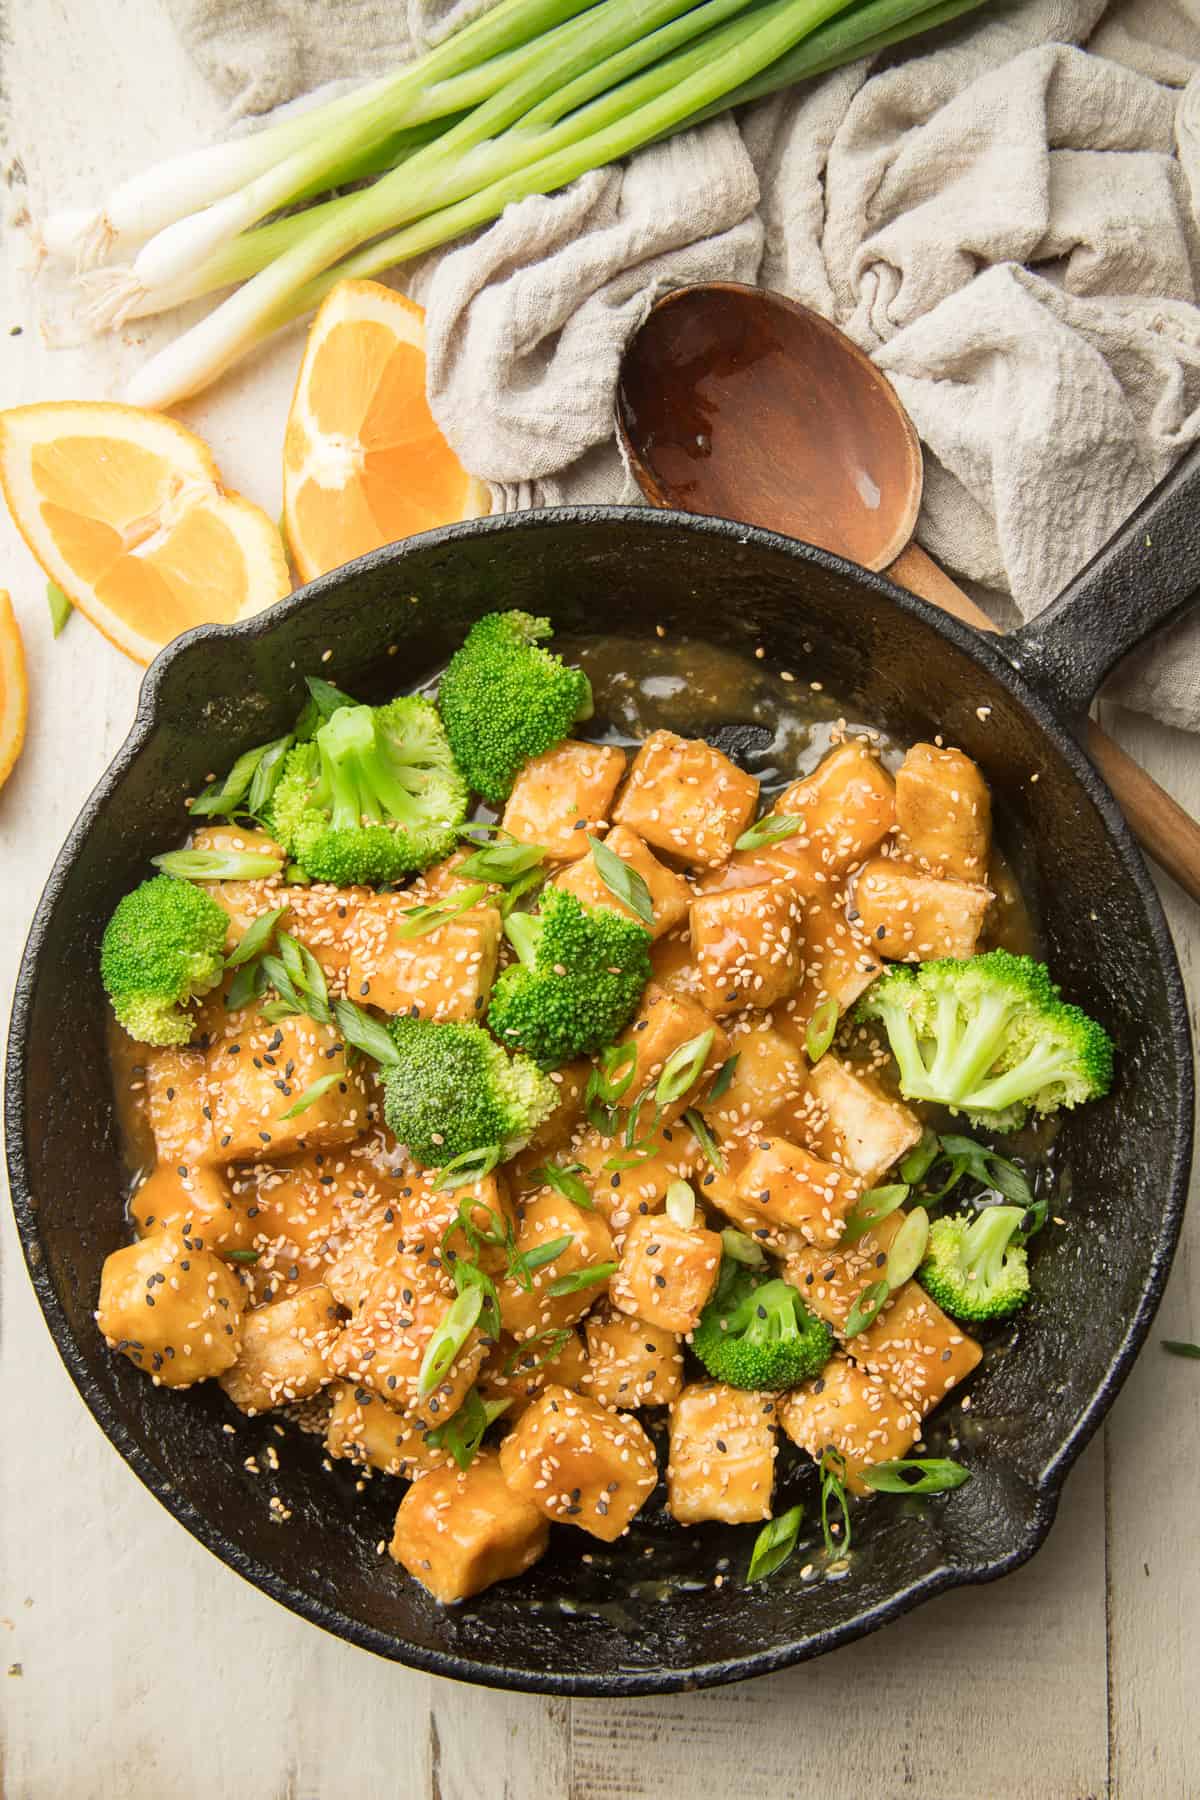 Skillet of Crispy Orange Tofu and Broccoli with Spoon on the Side